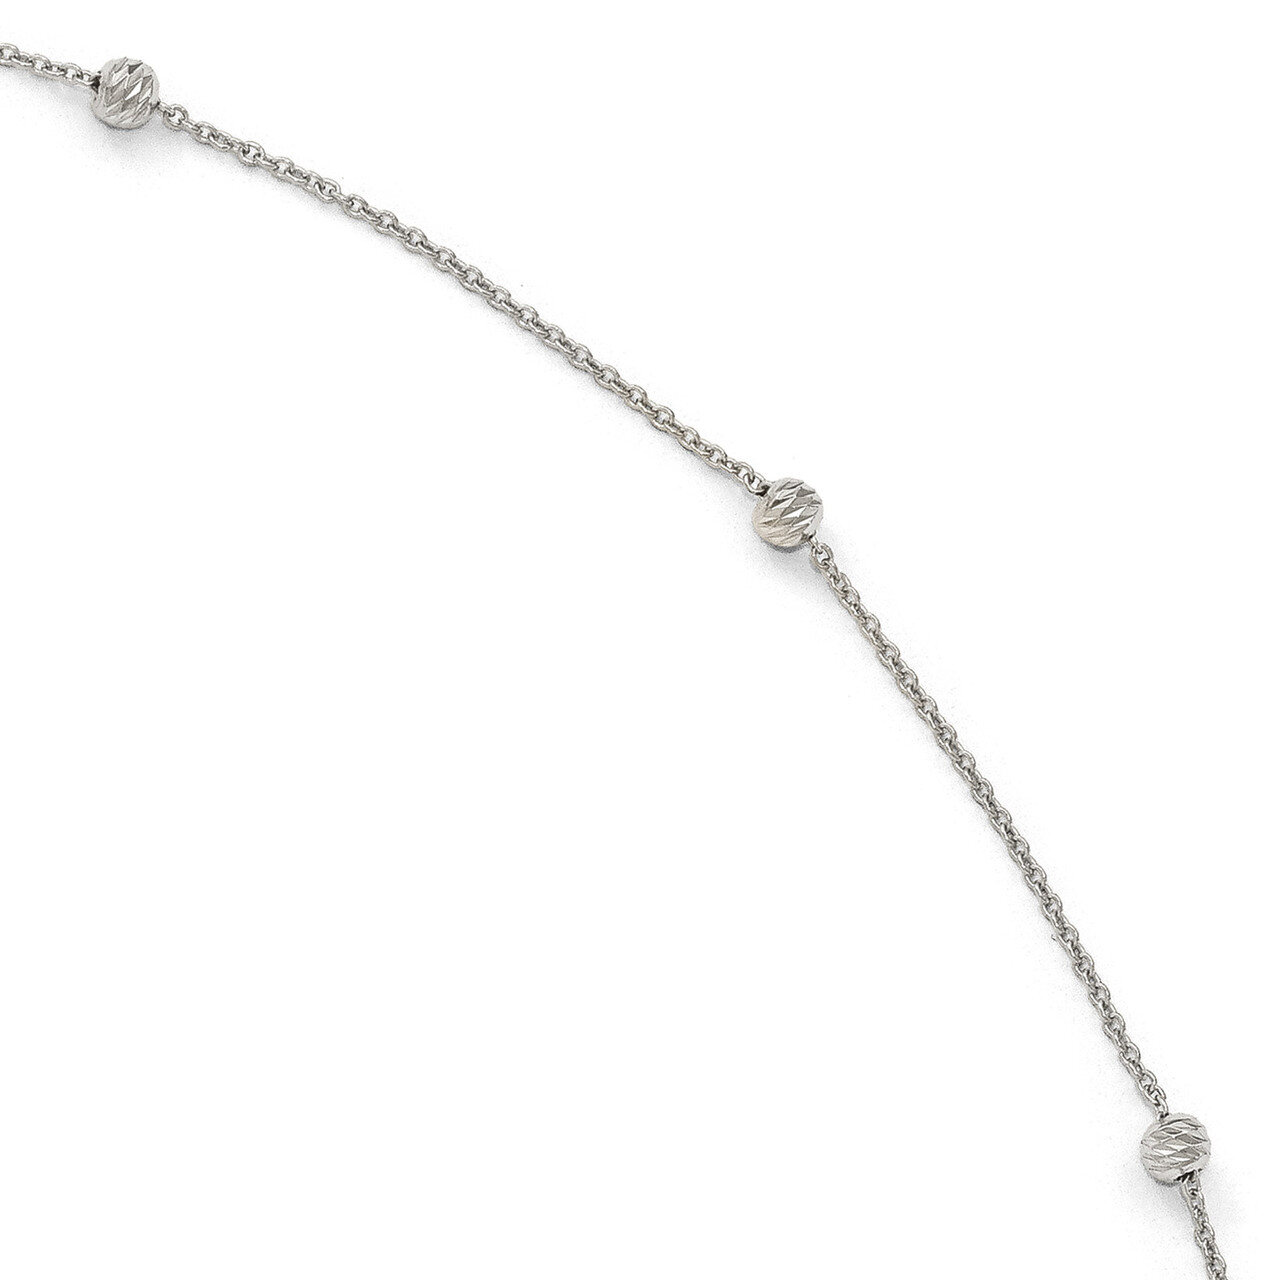 Diamond-ctu Beaded with 1 inch Extender Anklet 10 Inch 14K White Gold HB-LF568-10